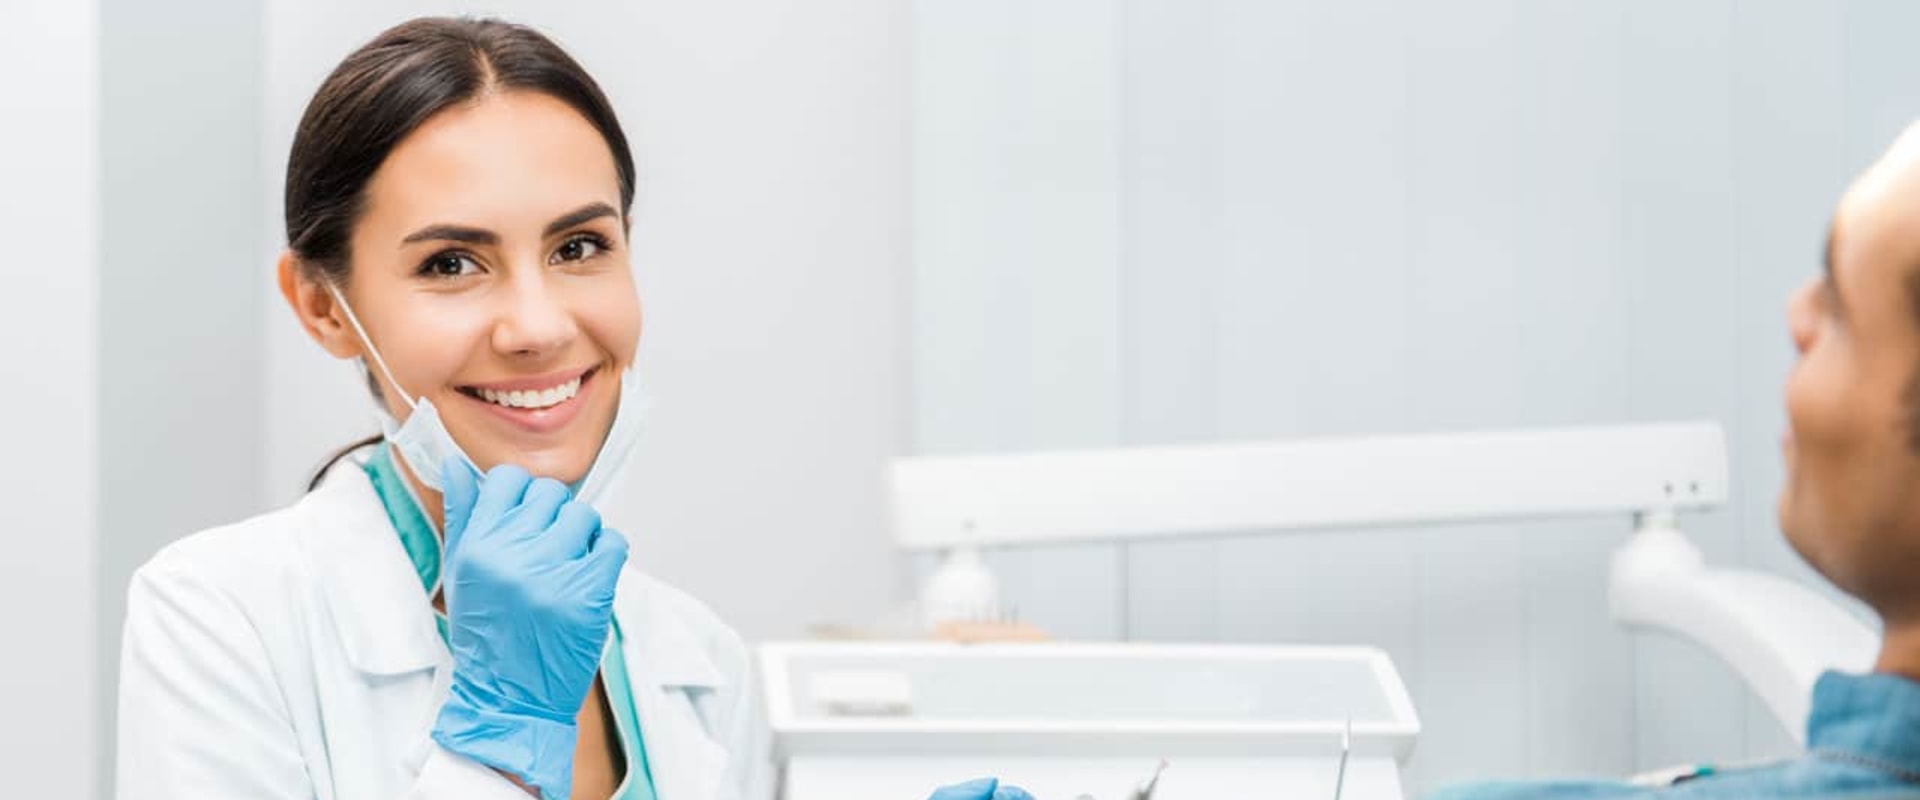 Pain-Free Dentistry: Understanding General Anesthesia